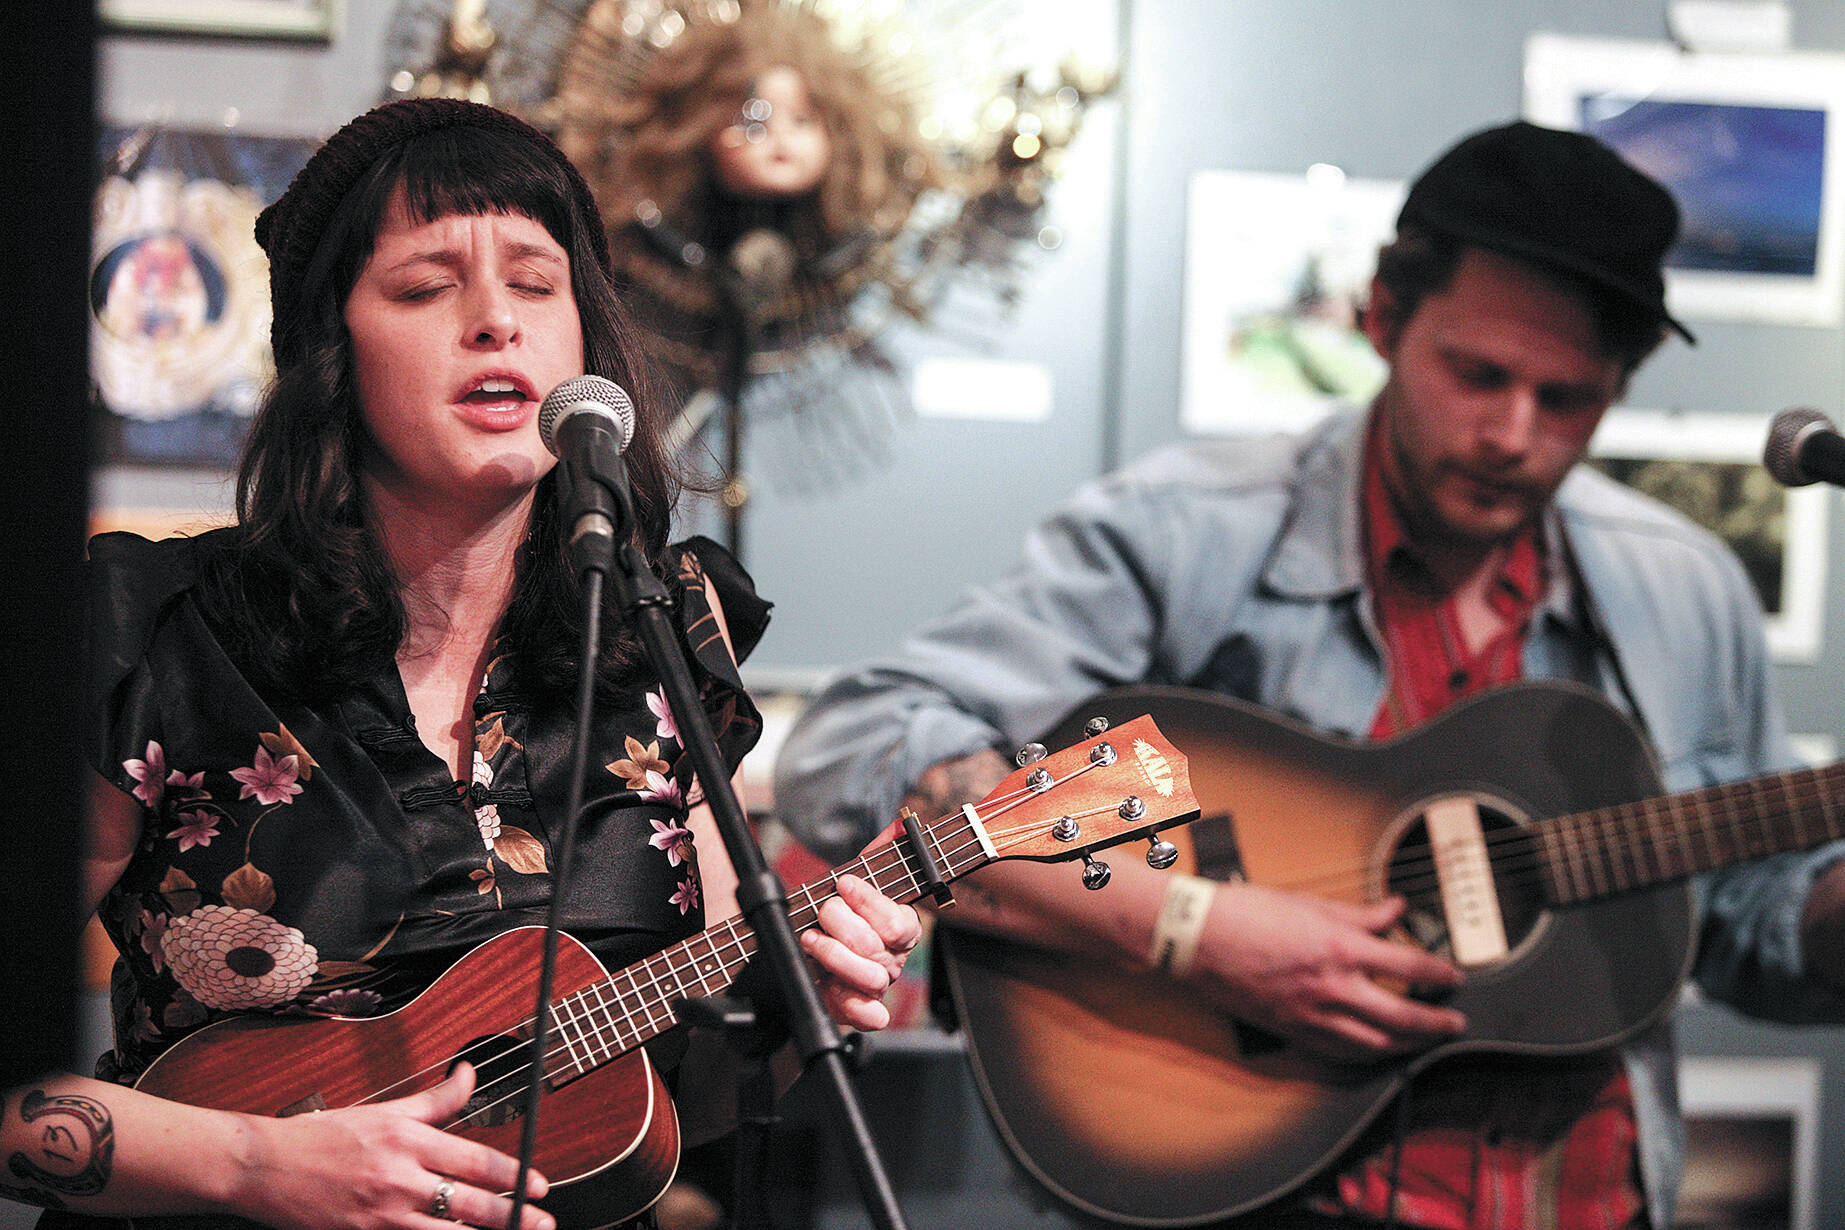 Christa and Richard Porter, of The Porters, are scheduled to perform at Cafe Zippy in Everett on Sept. 17. (Ian Terry / Herald file)